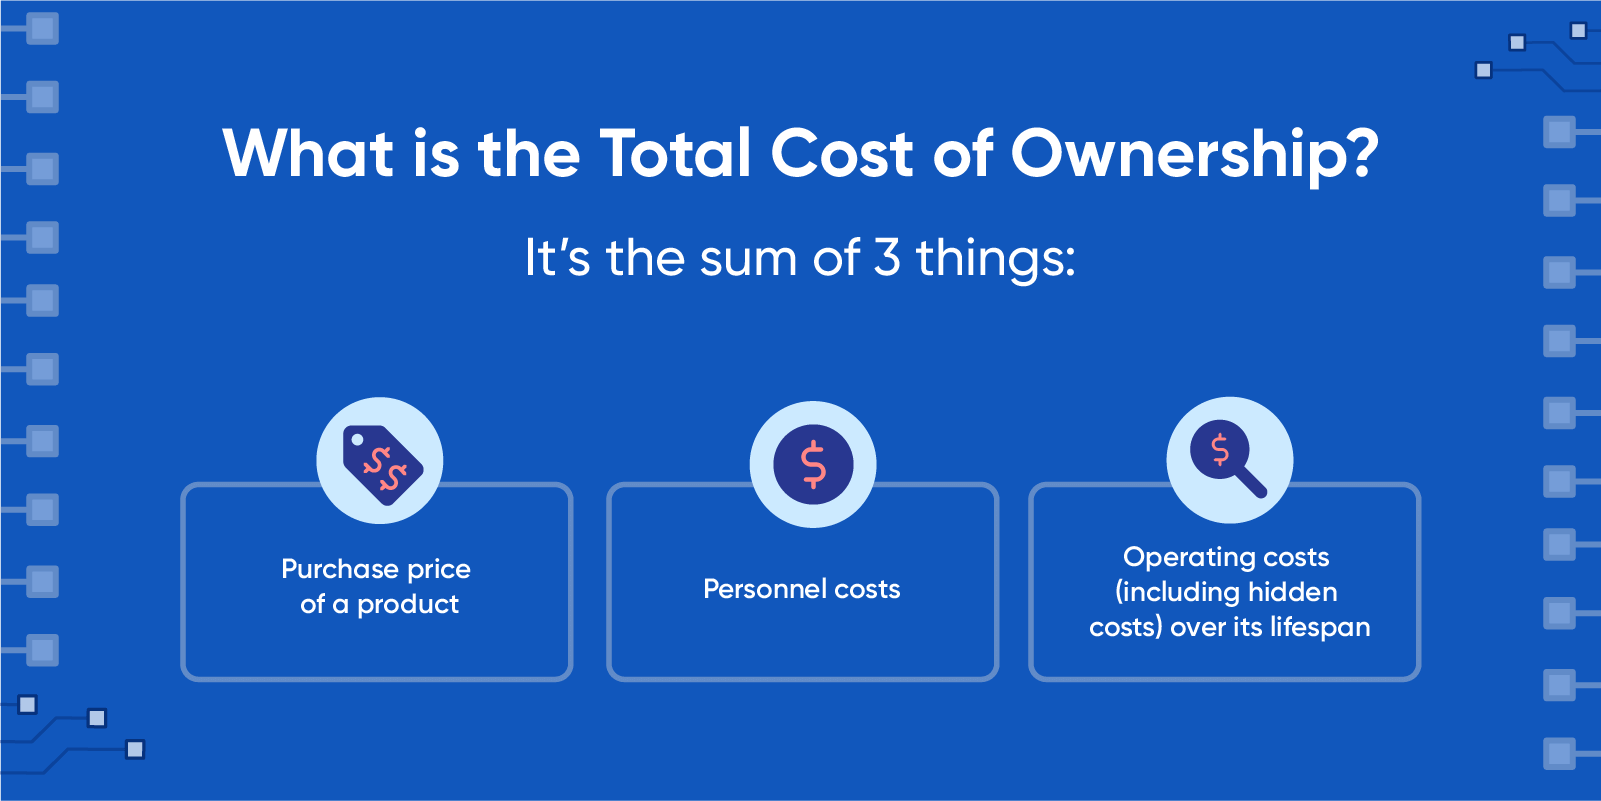 What is Total Cost of Ownership?